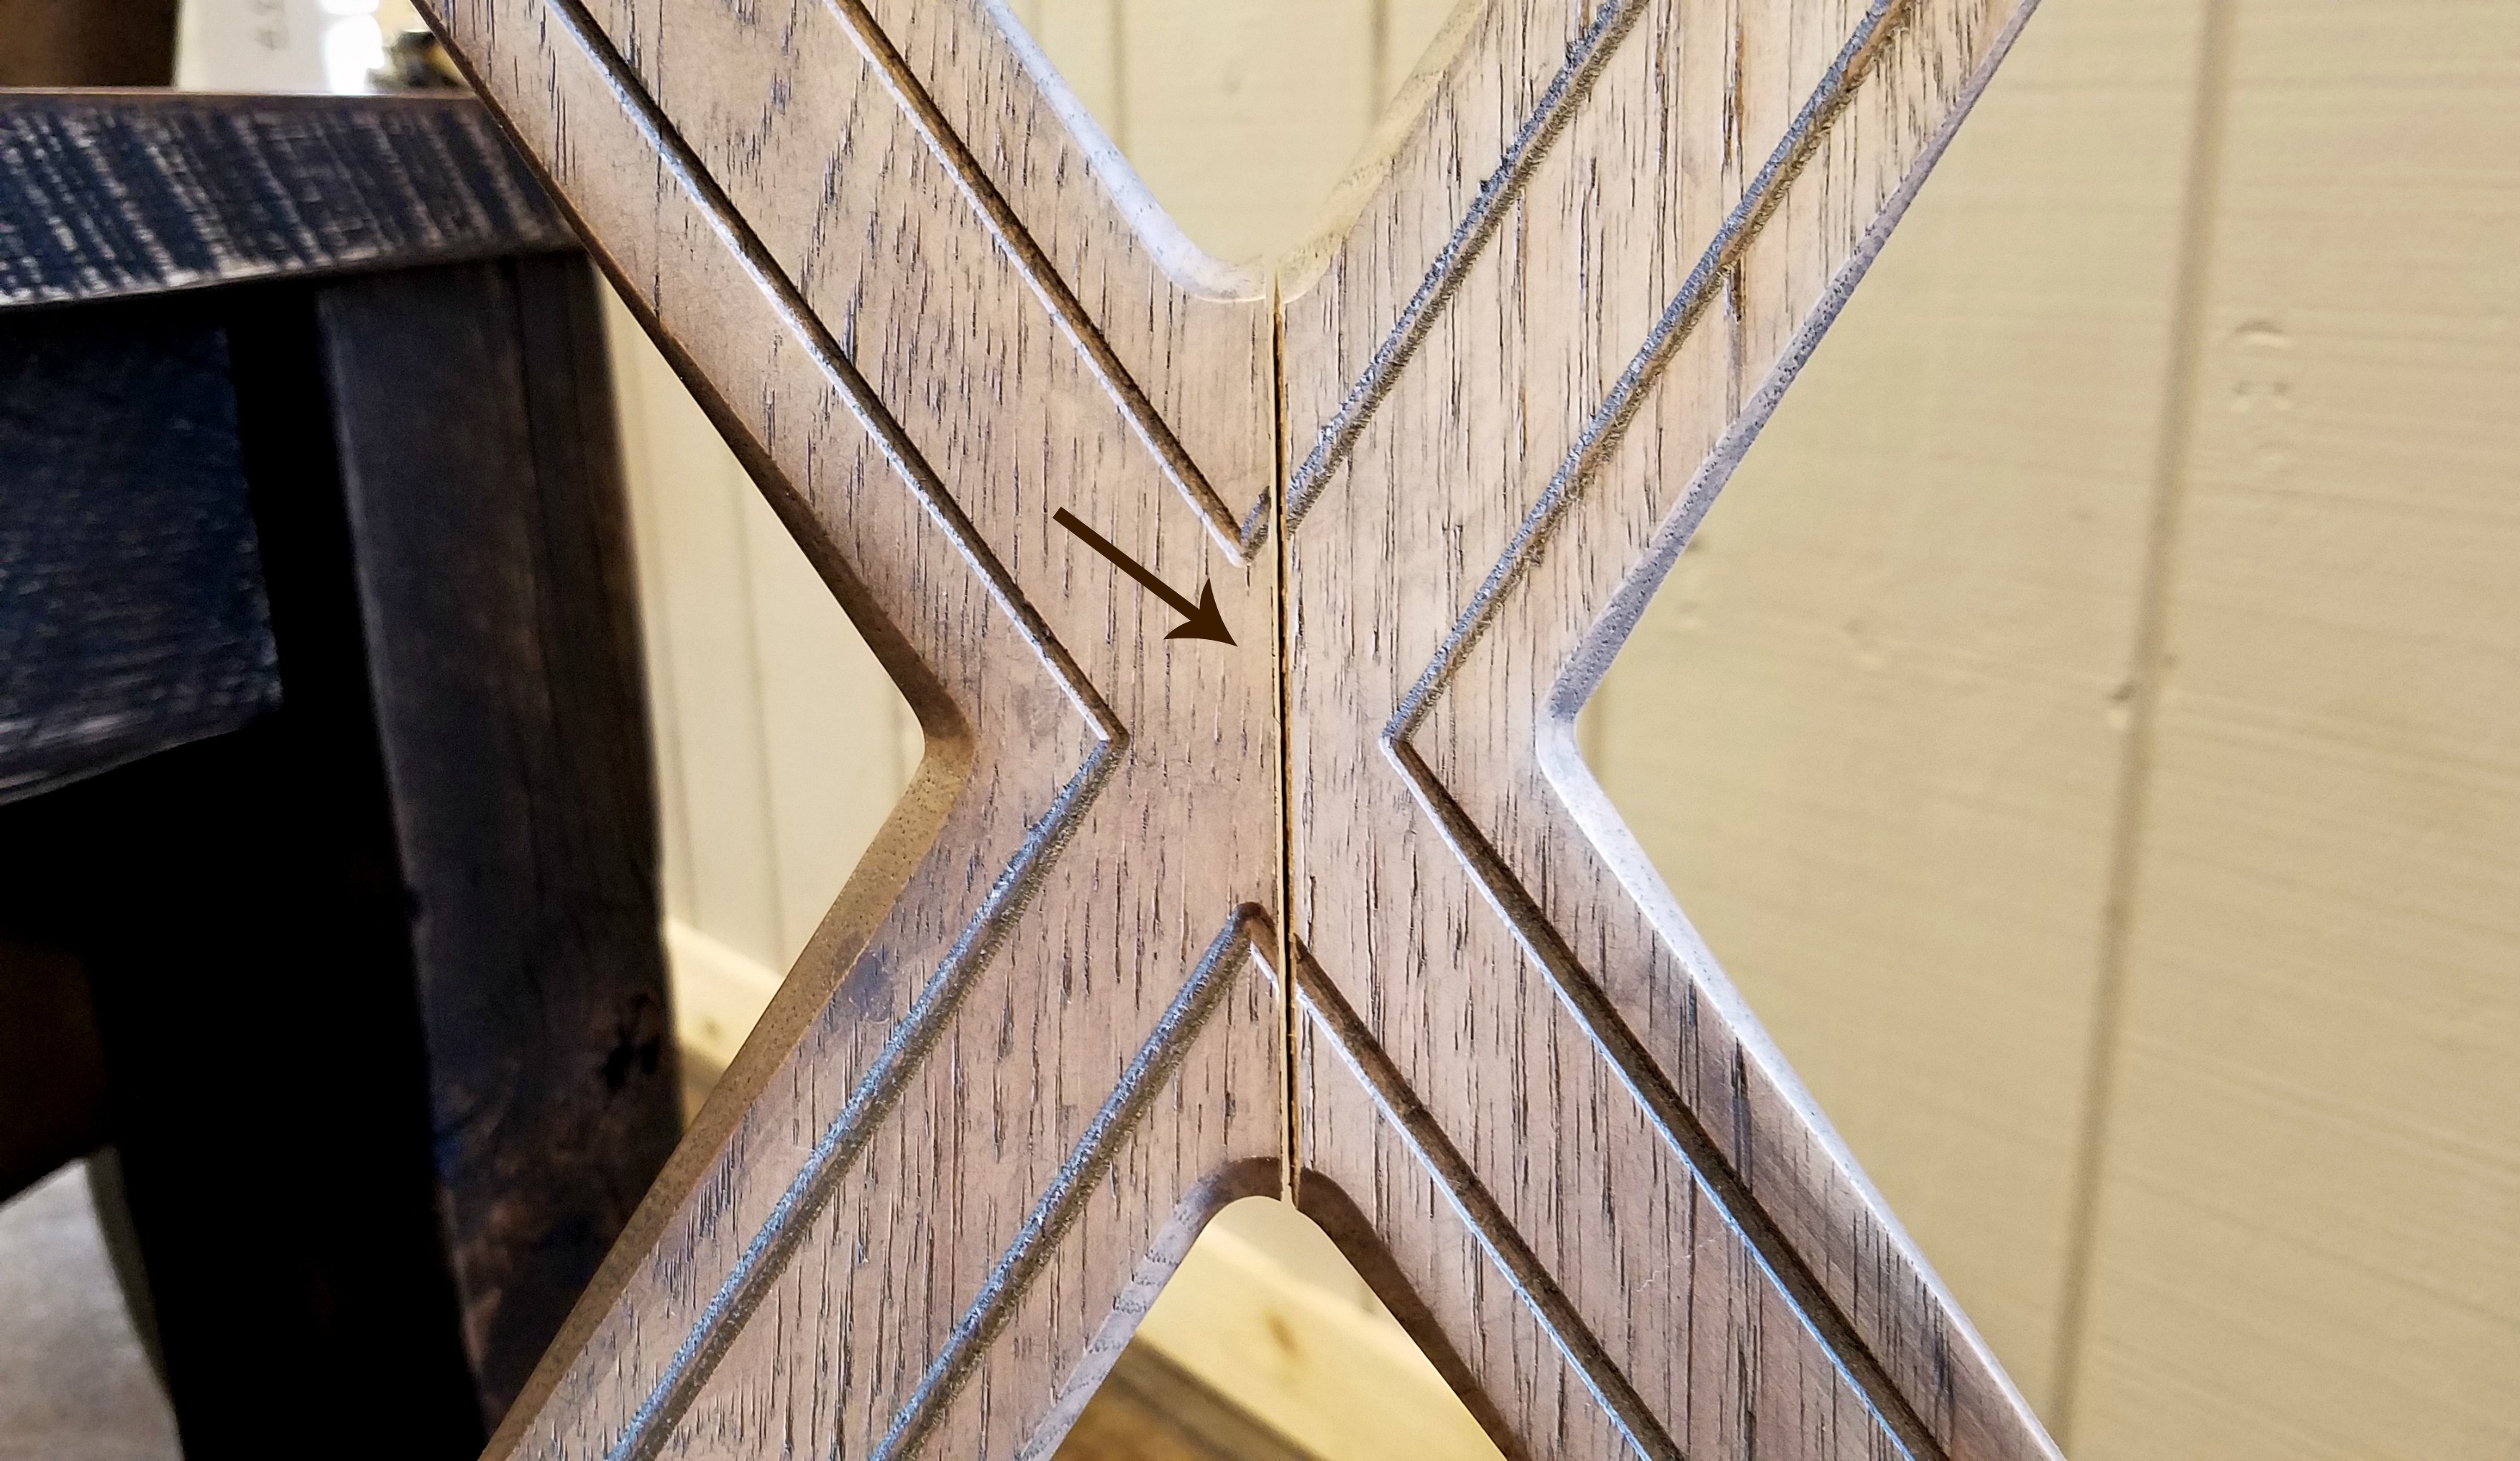 Chair crack showing affect of humidity